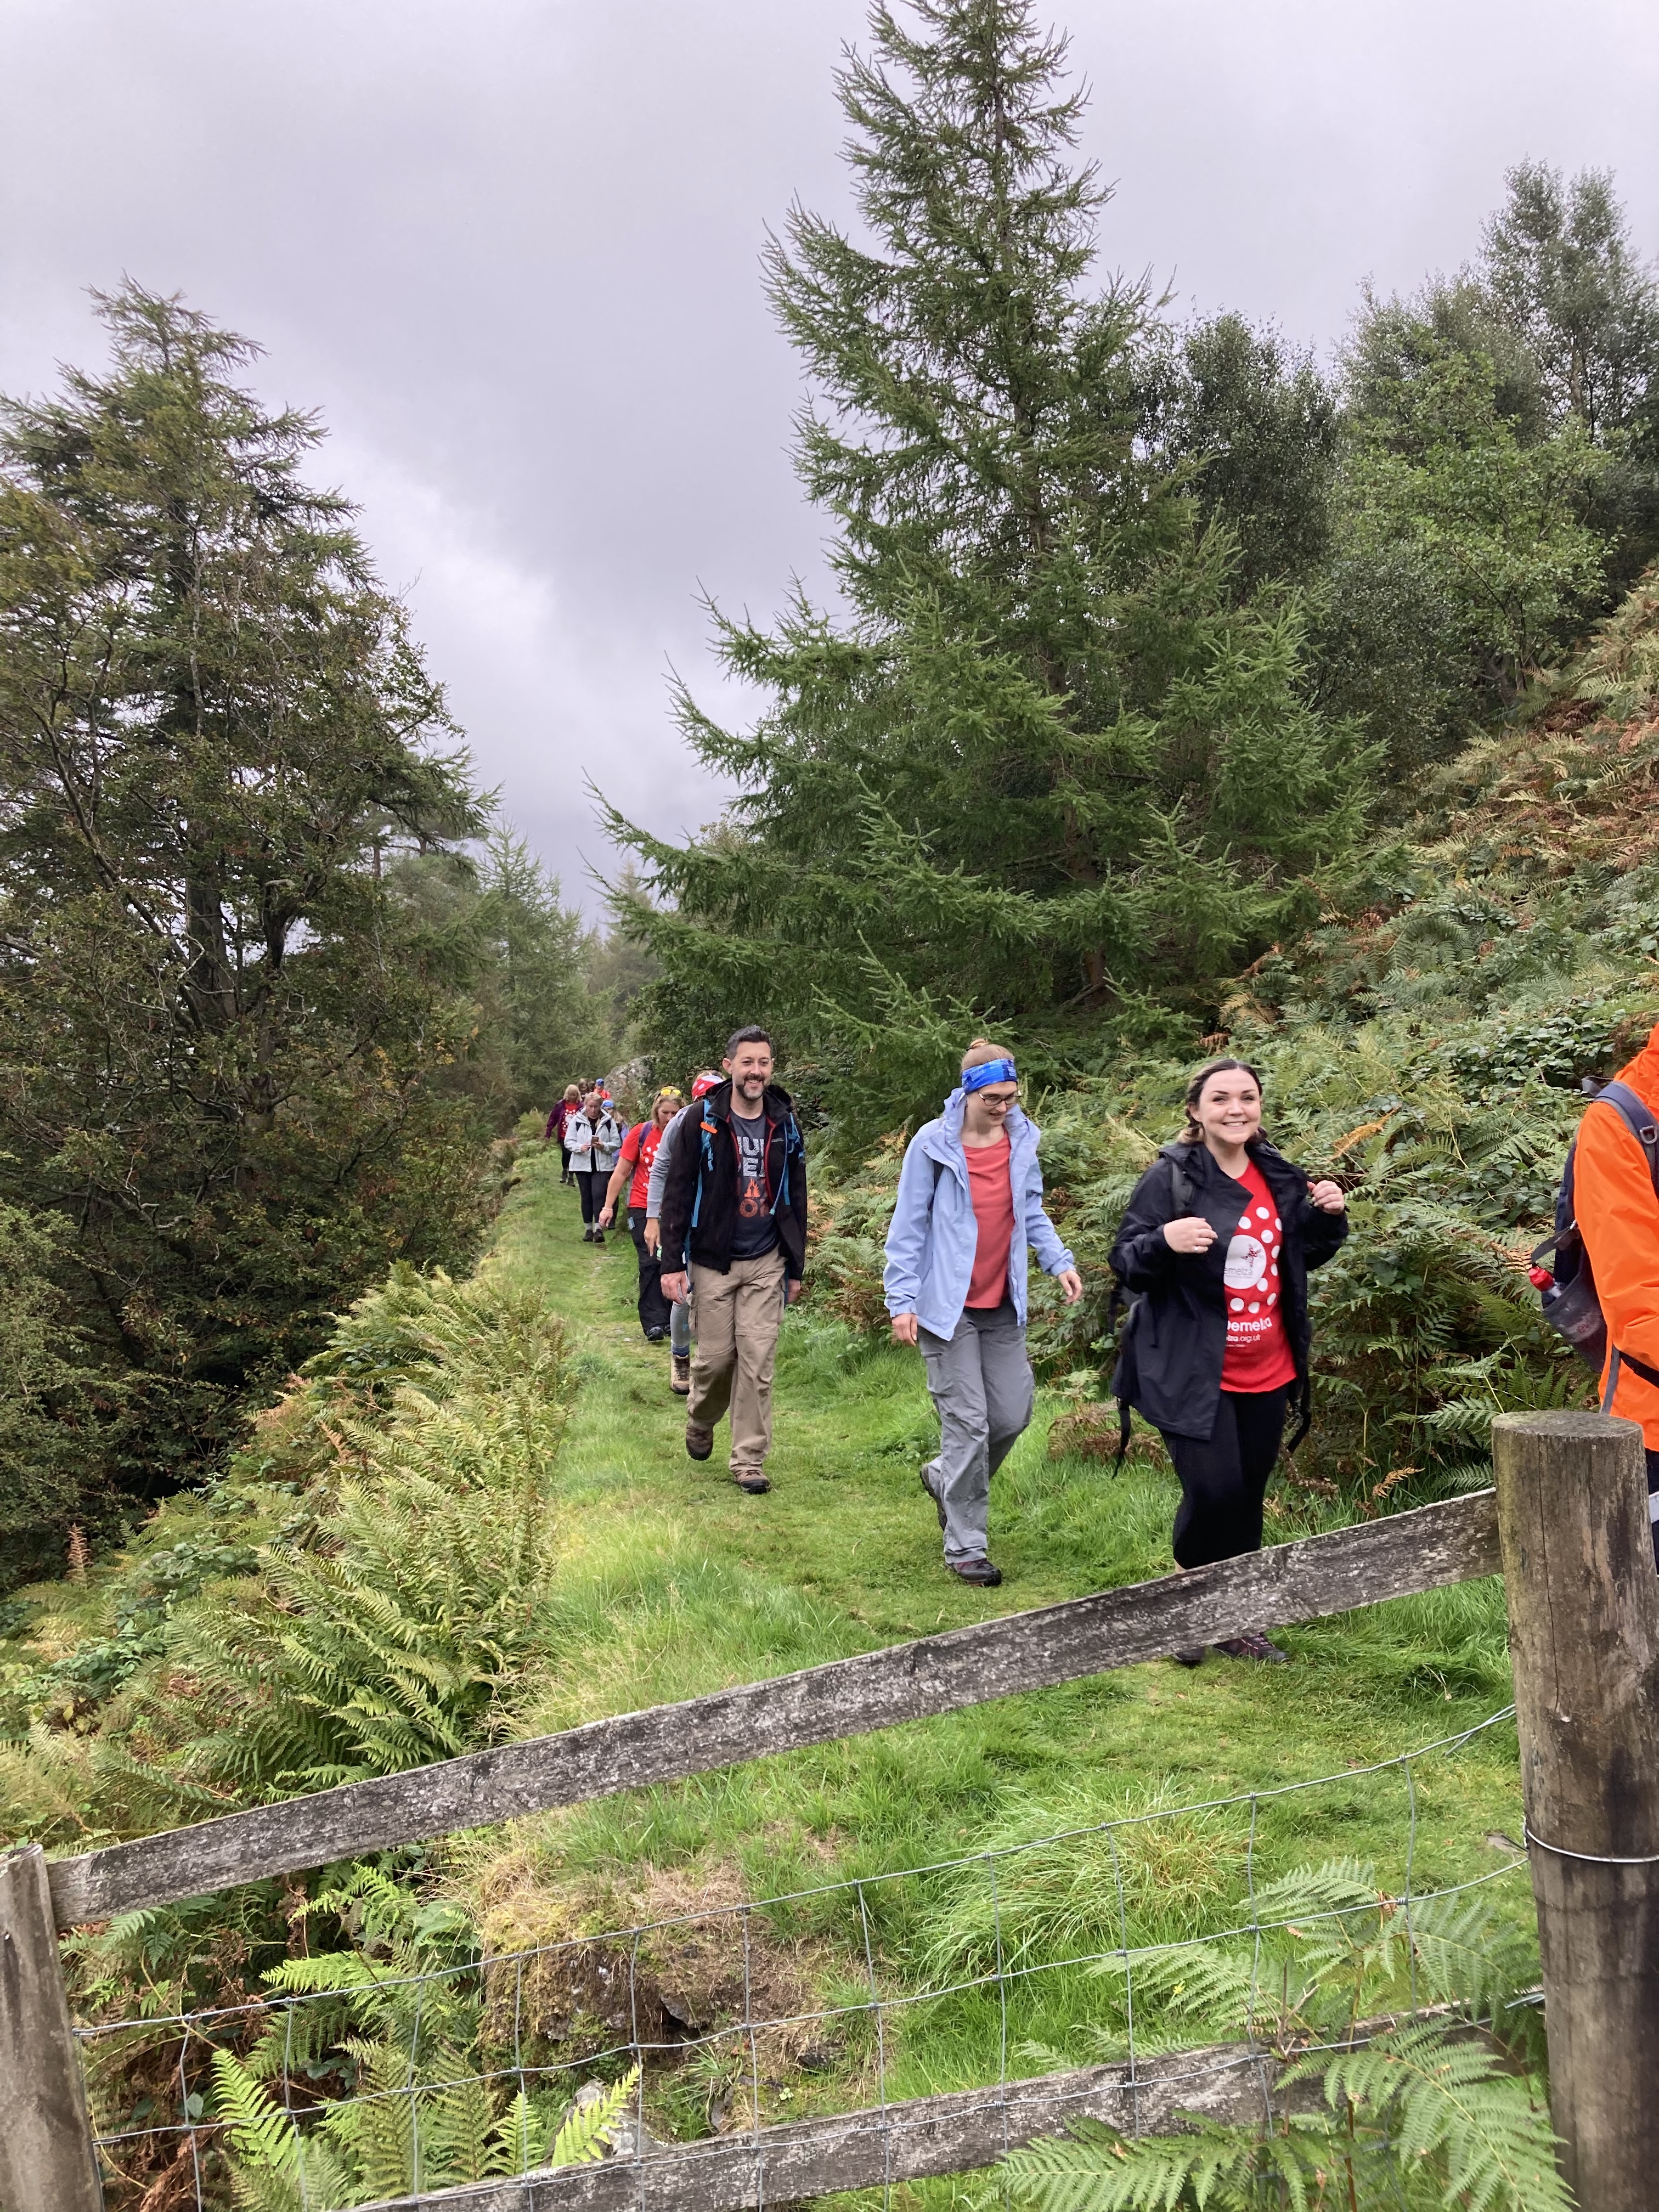 A team of hikers walking through a wooded area in Snowdonia National Park.